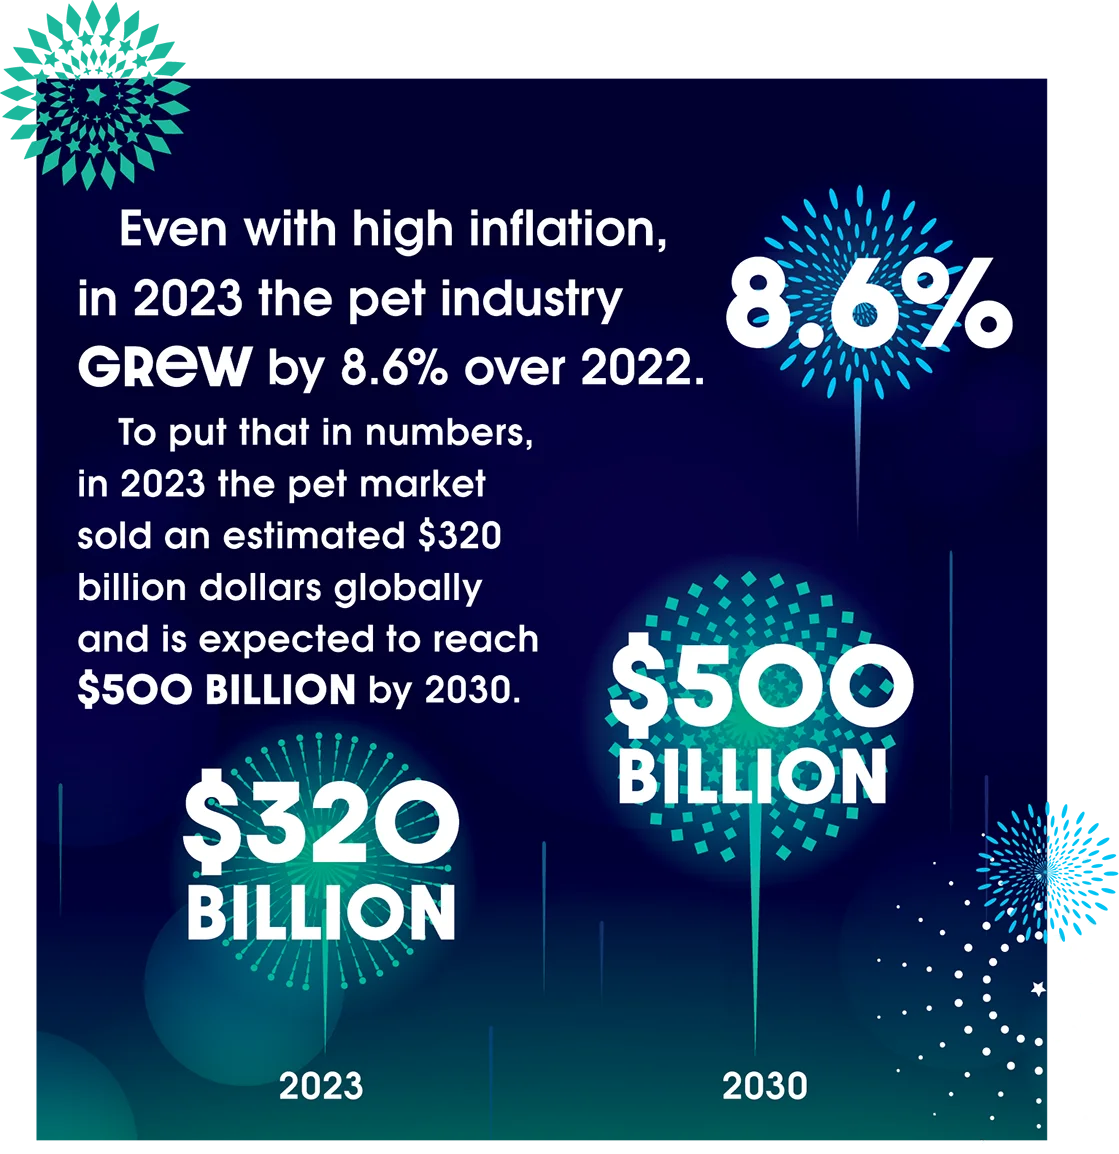 Even with high inflation, in 2023 the pet industry GREW by 8.6 percent over 2022. To put that in numbers, in 2023 the pet market sold an estimated $320 billion dollars globally and is expected to reach $500 Billion by 2030.